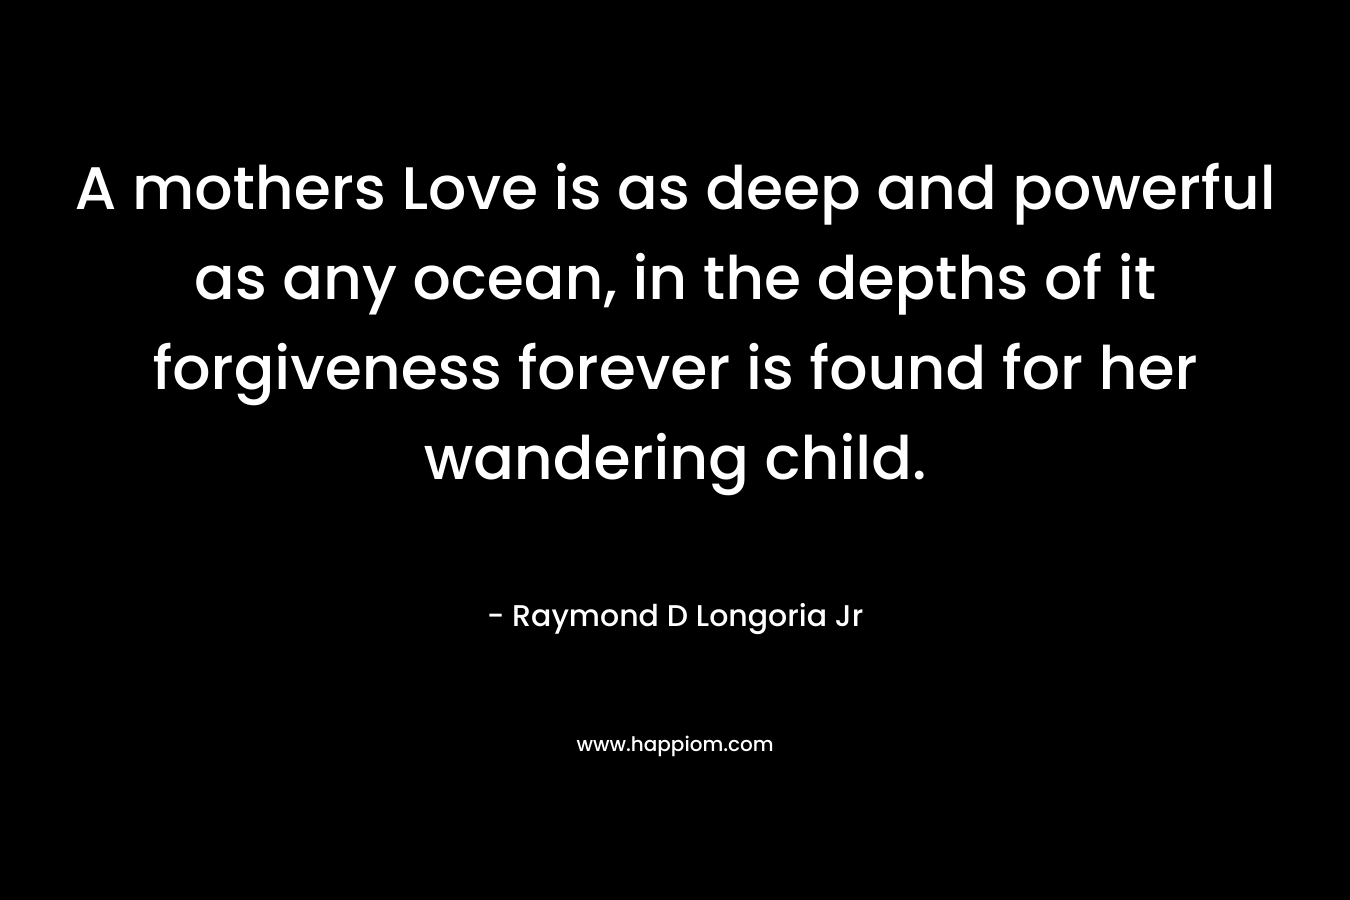 A mothers Love is as deep and powerful as any ocean, in the depths of it forgiveness forever is found for her wandering child. – Raymond D Longoria Jr